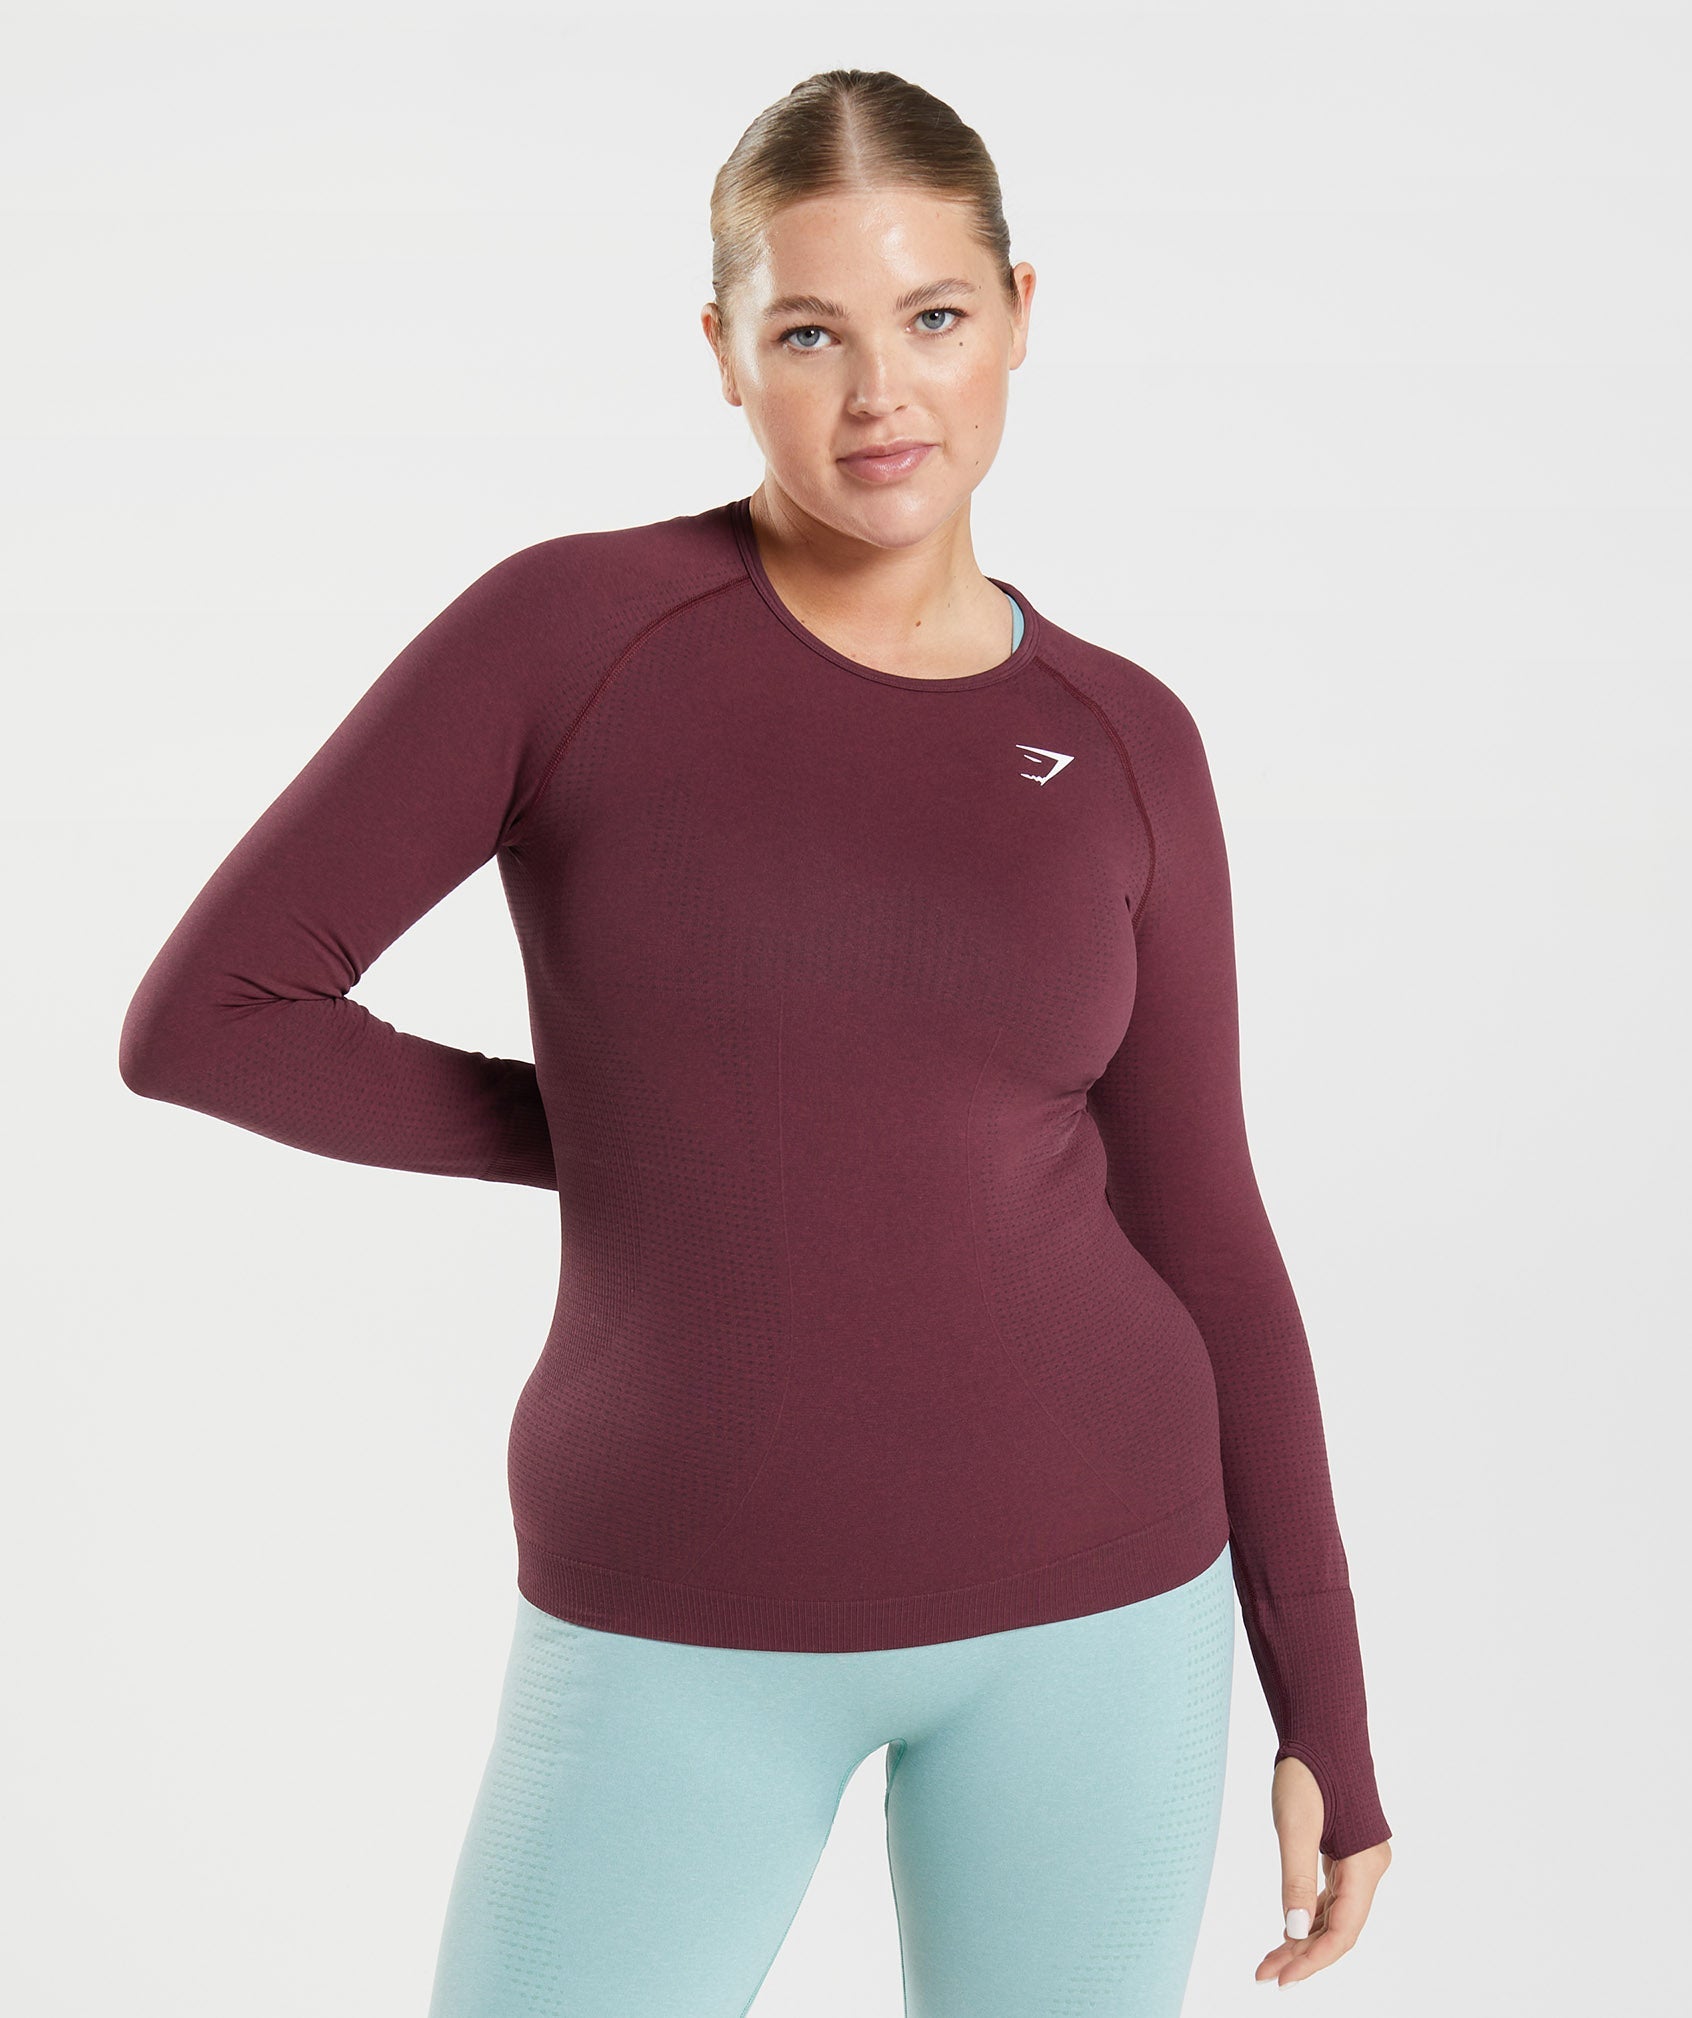 Style it your way! New ways to style the Gymshark Vital Seamless Long  Sleeve T-Shirt. Mix or match with…